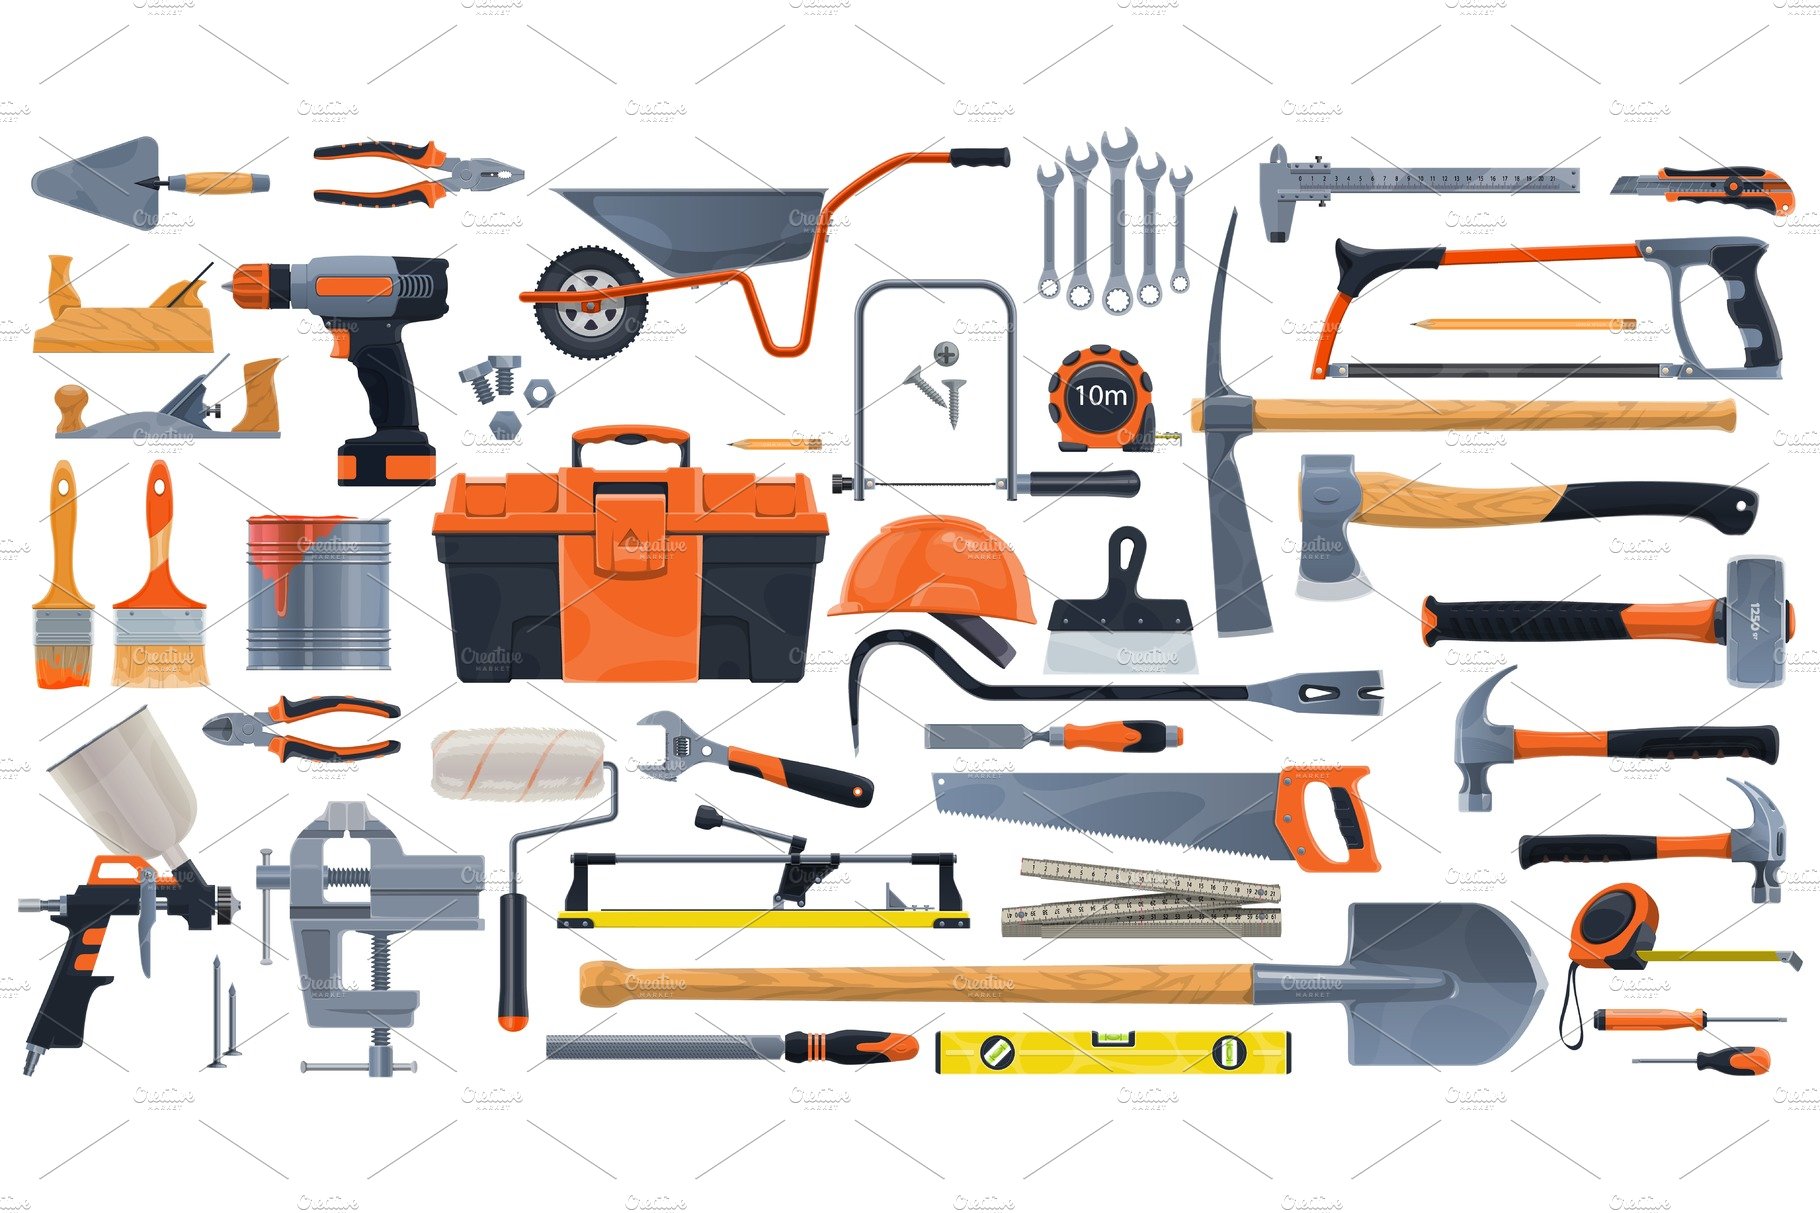 Construction, DIY and repair tools cover image.